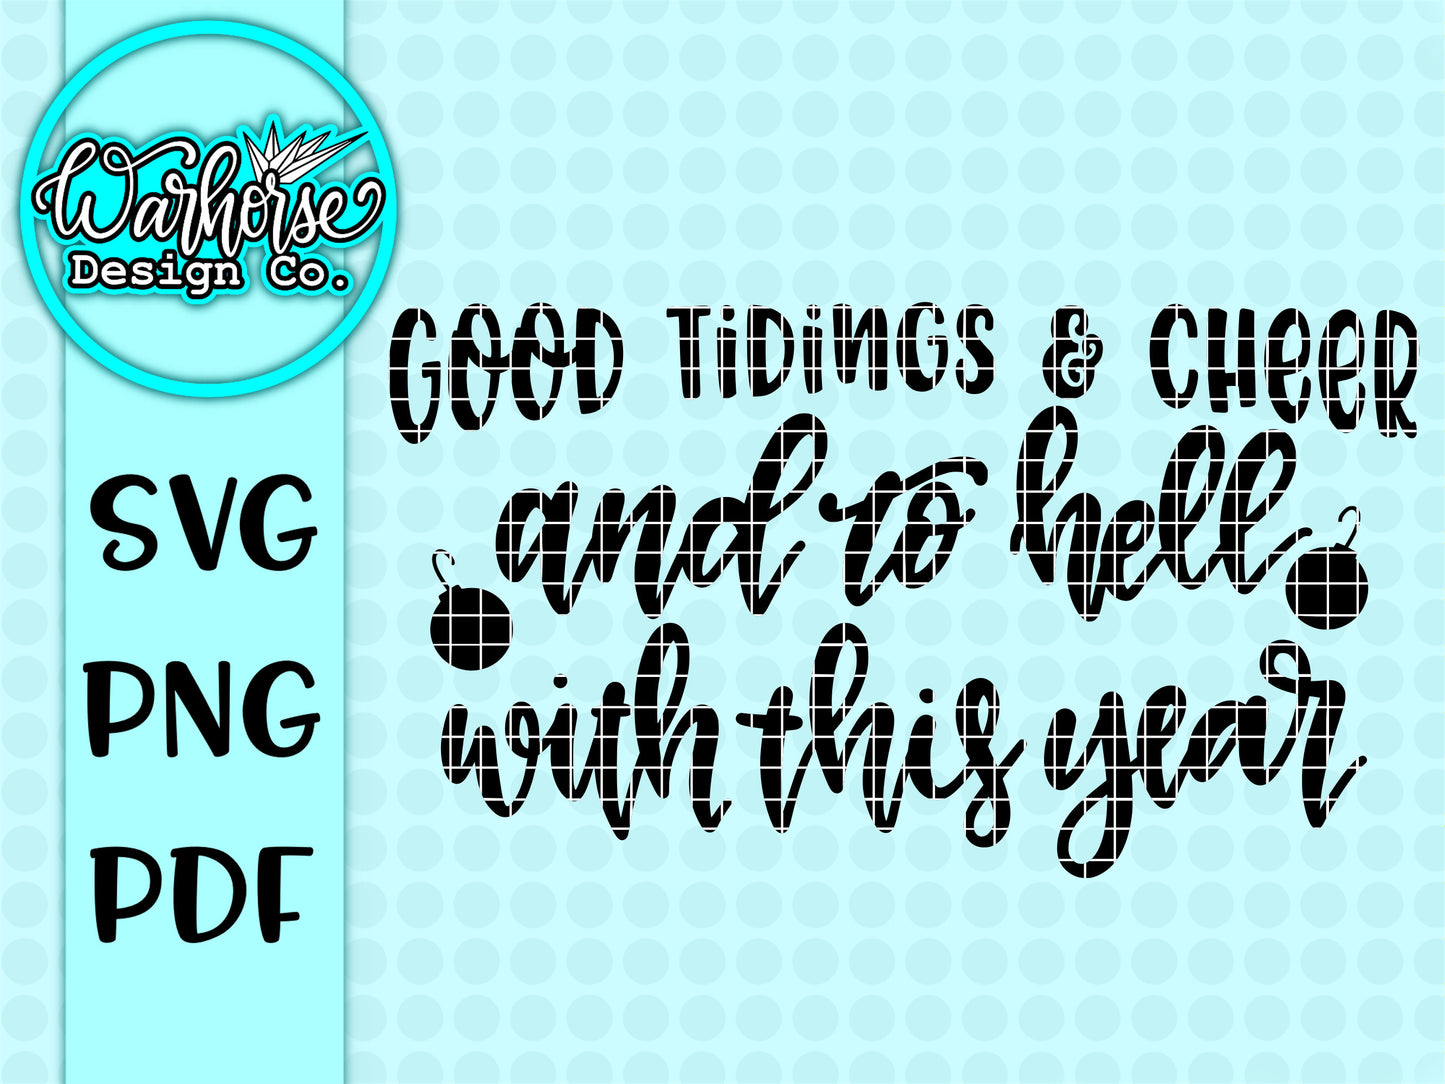 Good Tidings and Cheer & To hell with this year SVG, PNG, PDF